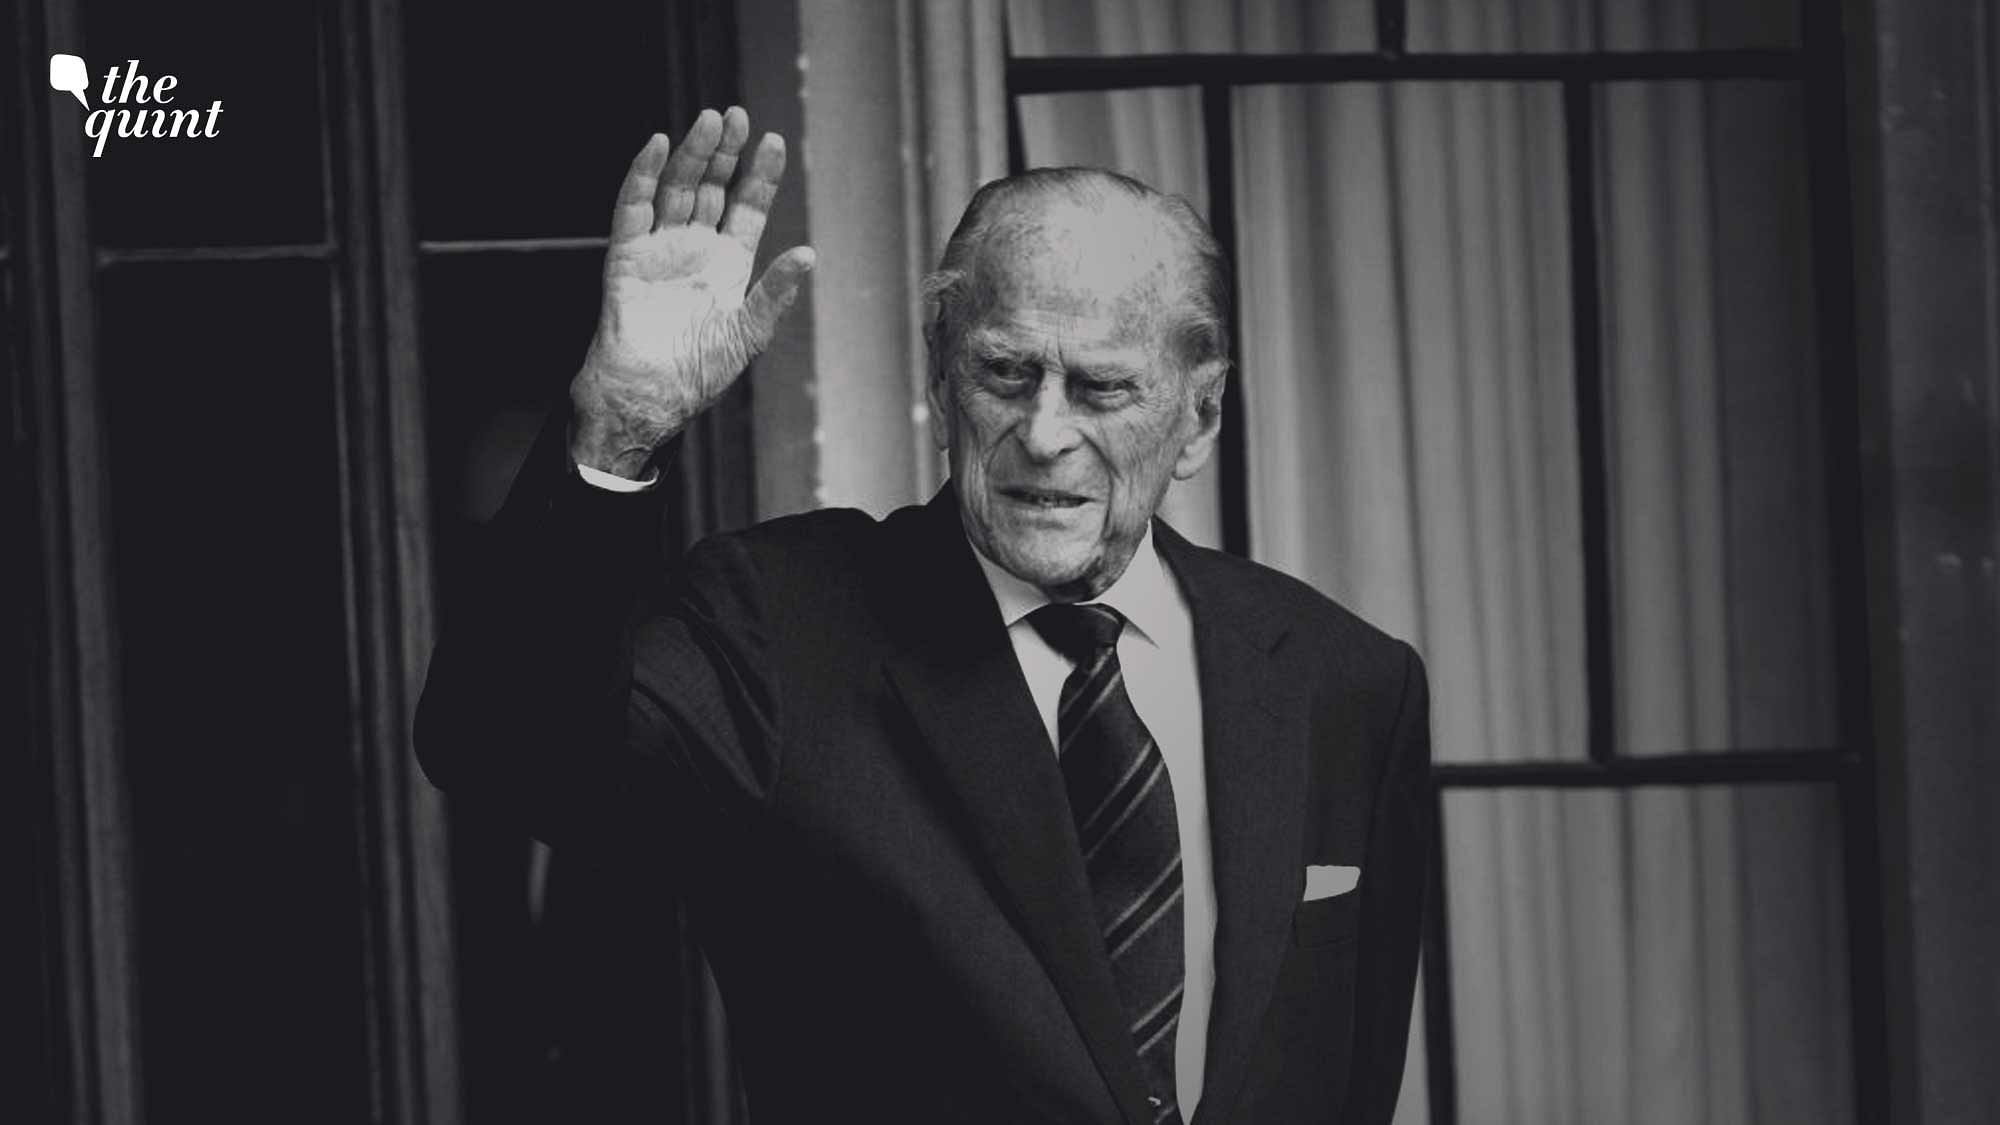 Queen Elizabeth II’s husband Prince Philip has passed away at the age of 99, the Royal Family announced on Friday, 9 April.